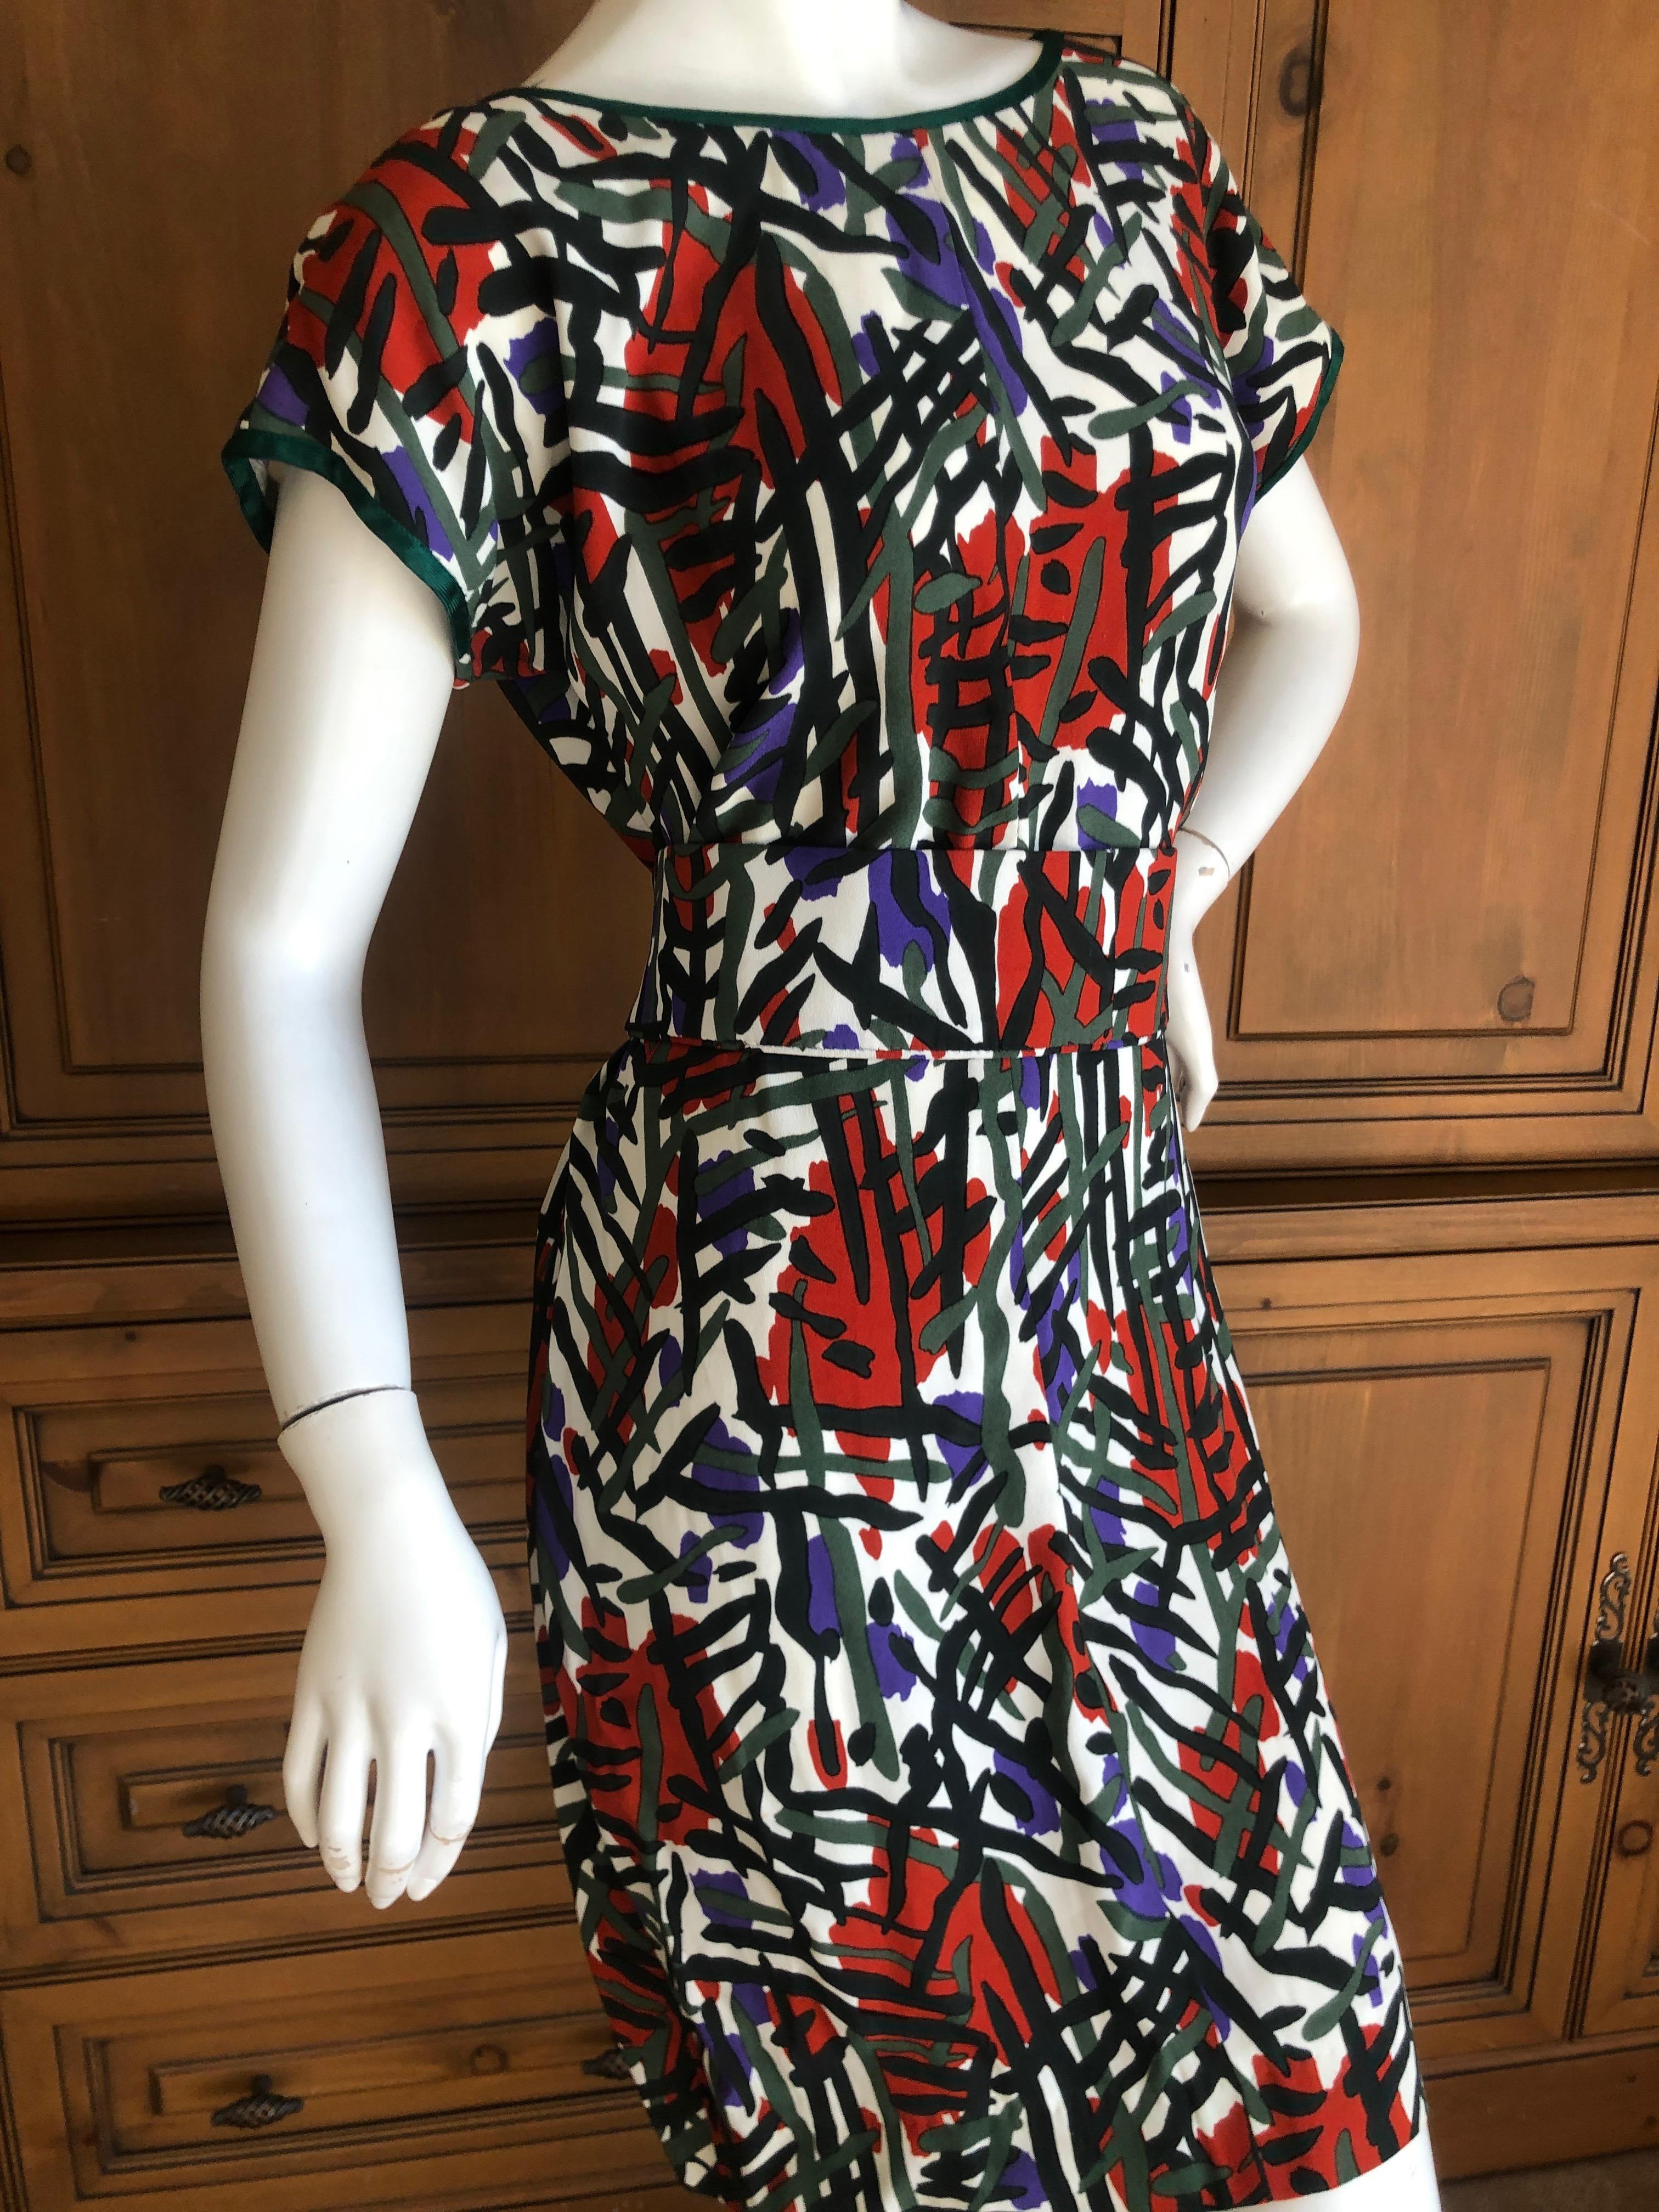 Yves Saint Laurent Rive Guache Vintage 1970's Belted Dress with Low Cut Back In Excellent Condition For Sale In Cloverdale, CA